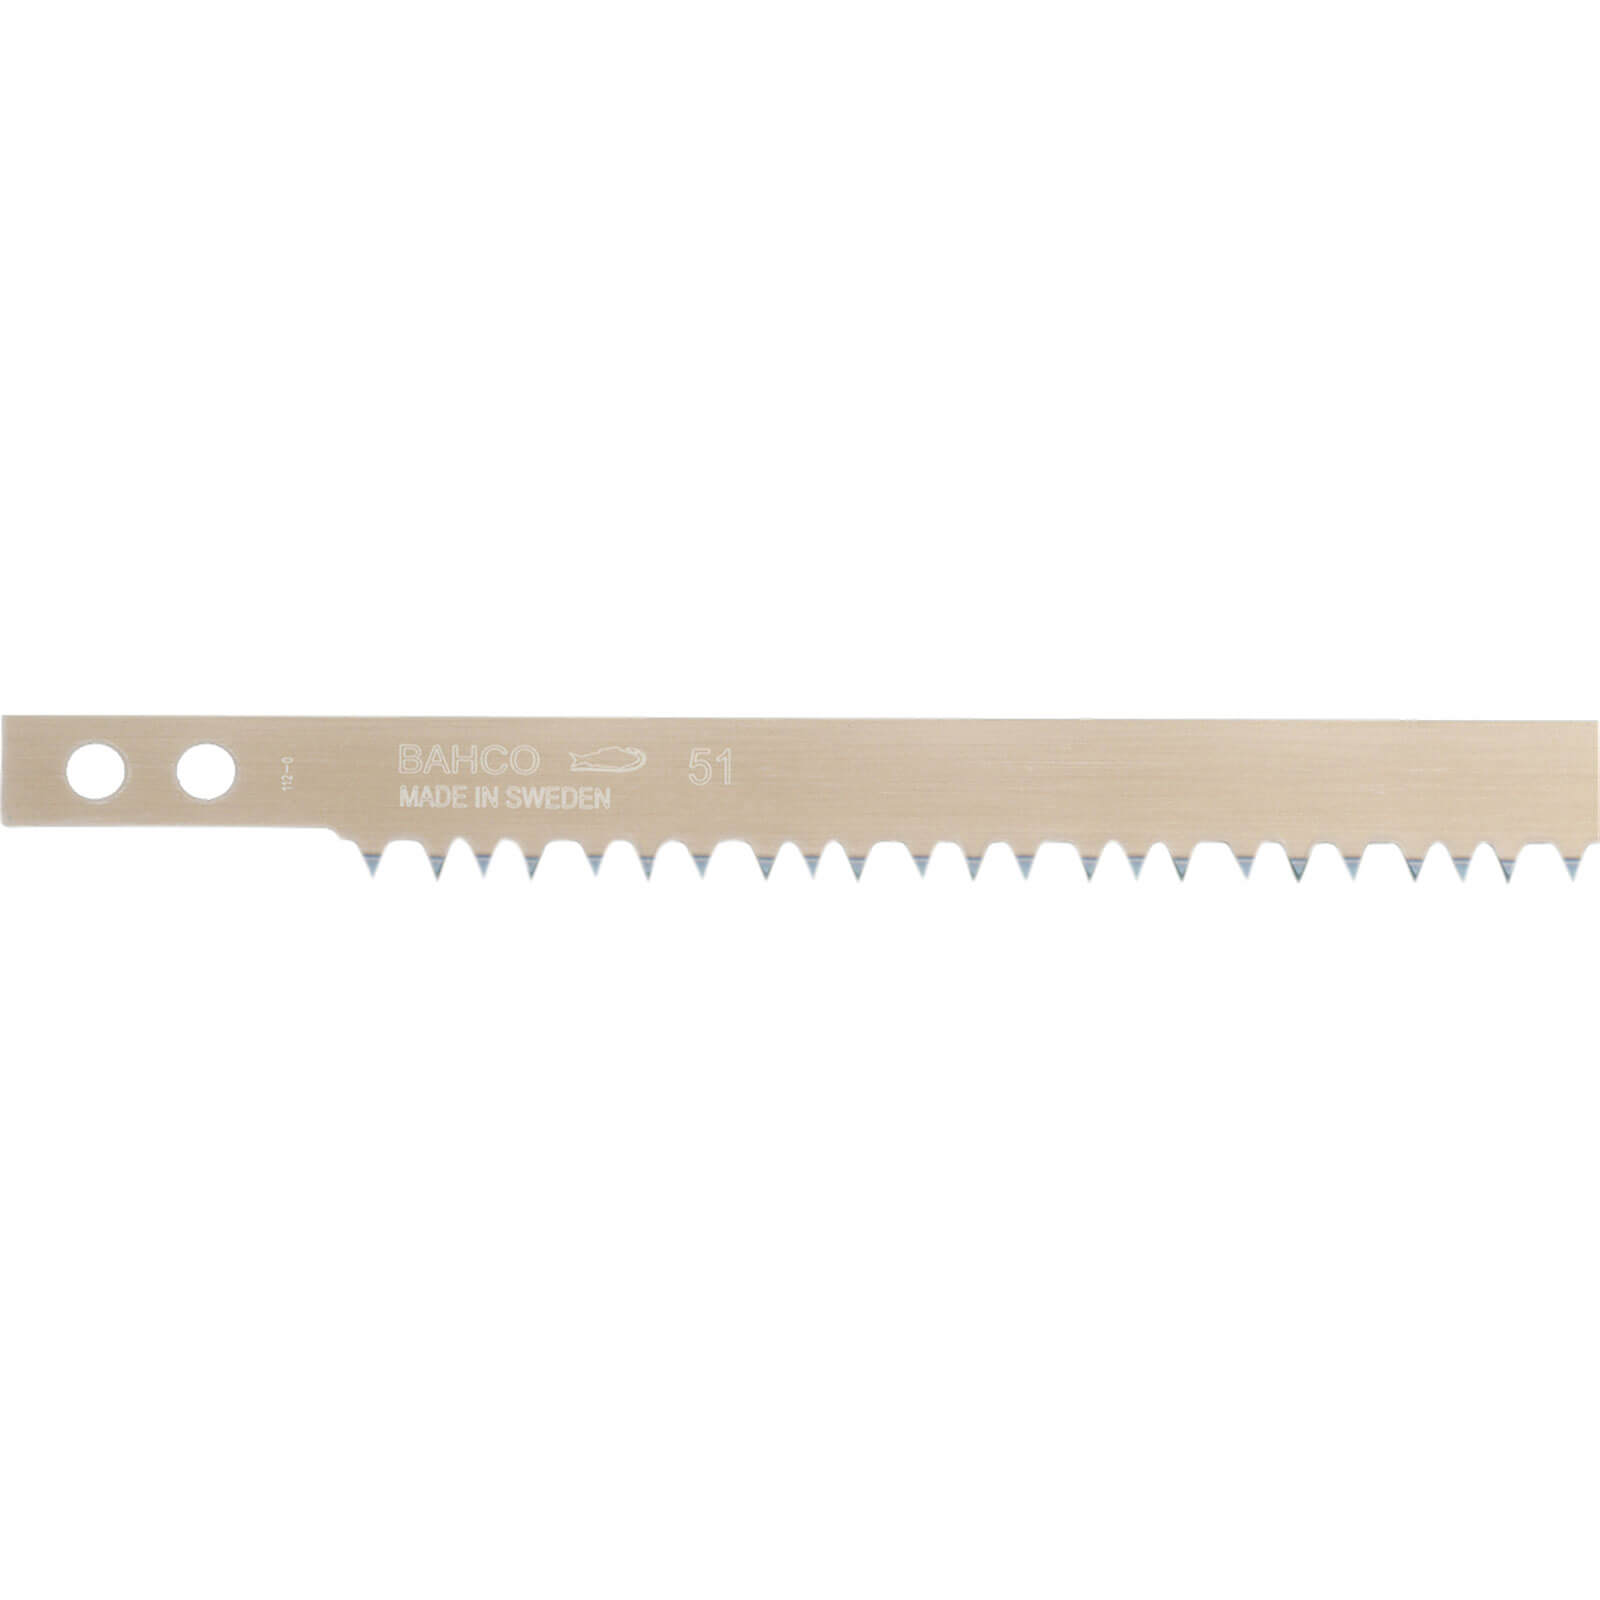 Bahco 36 Tooth Hard Point Bow Saw Blade 36